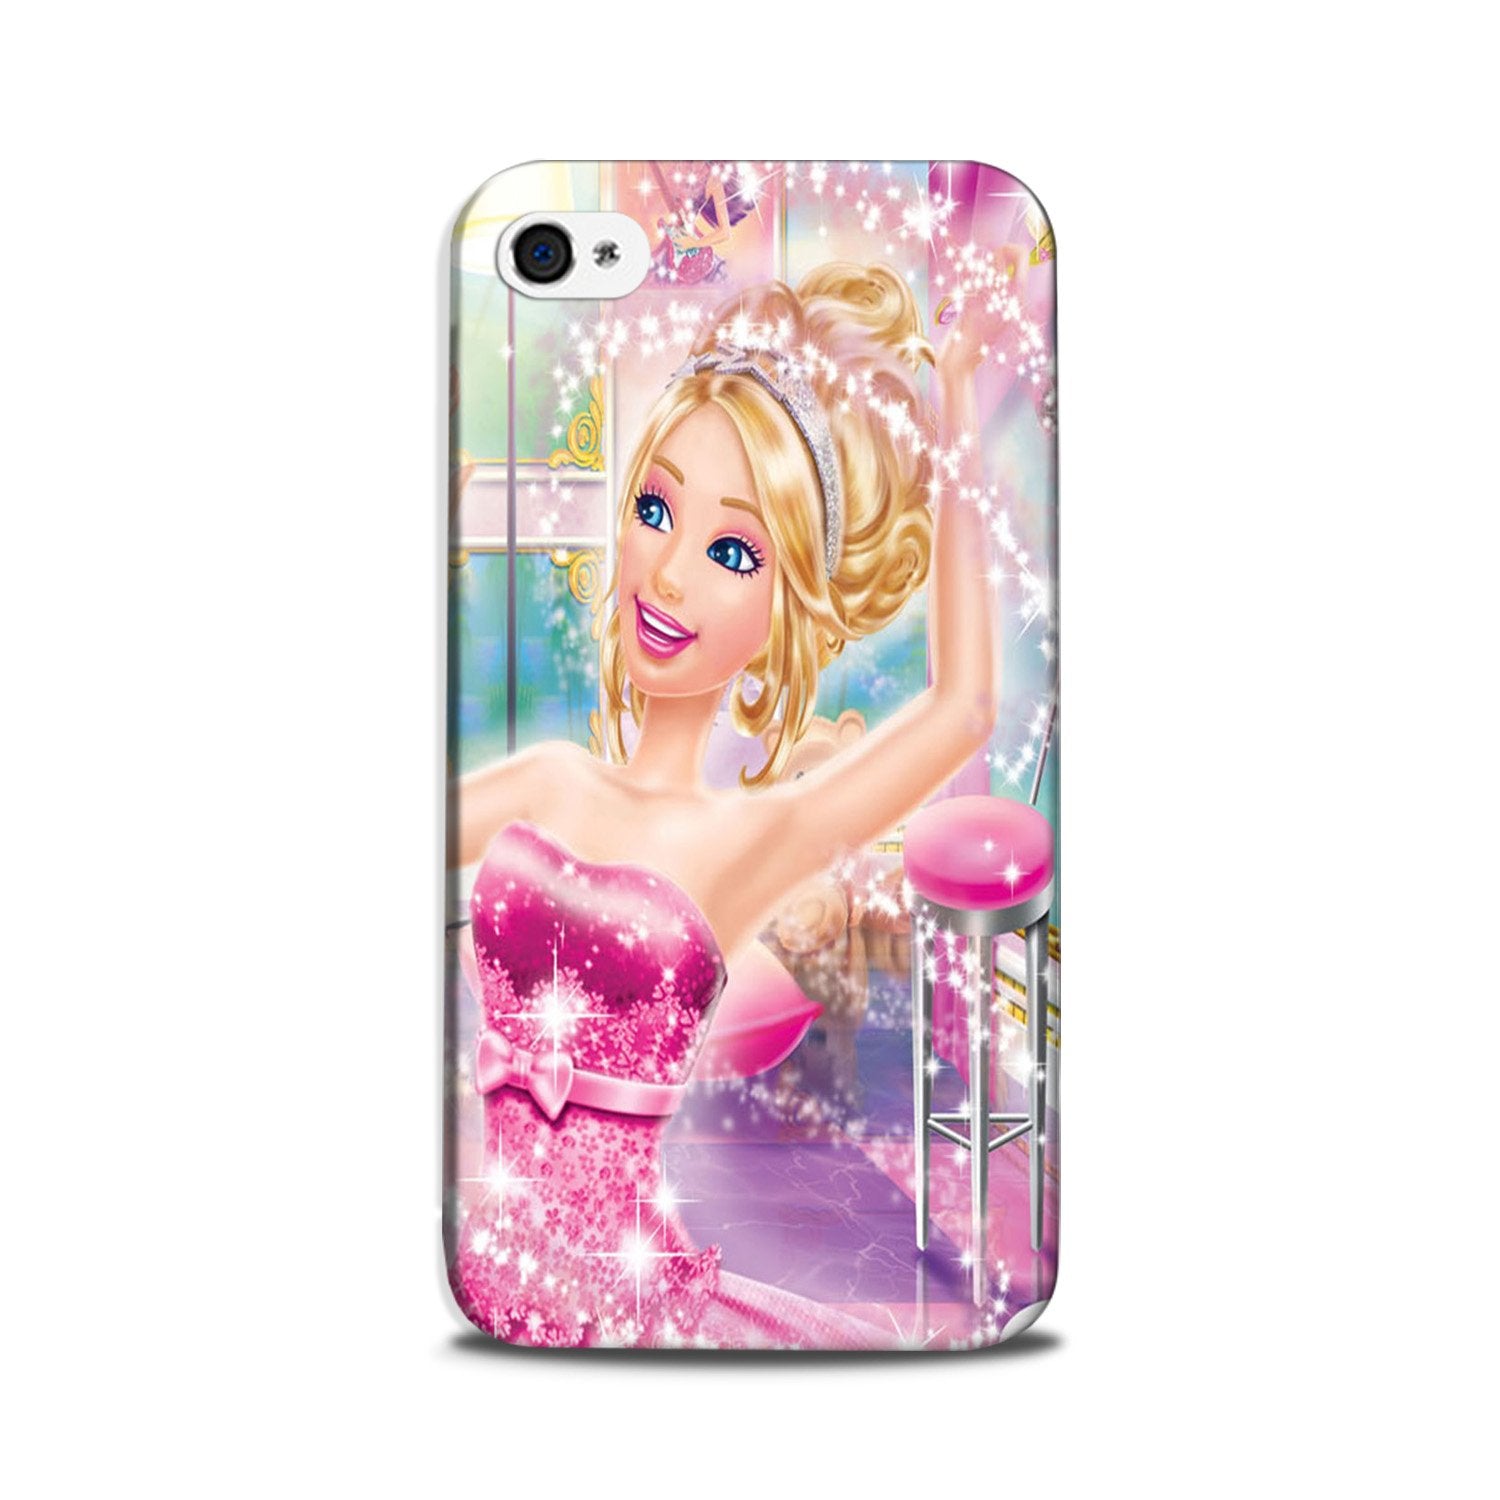 Princesses Case for iPhone 5/ 5s